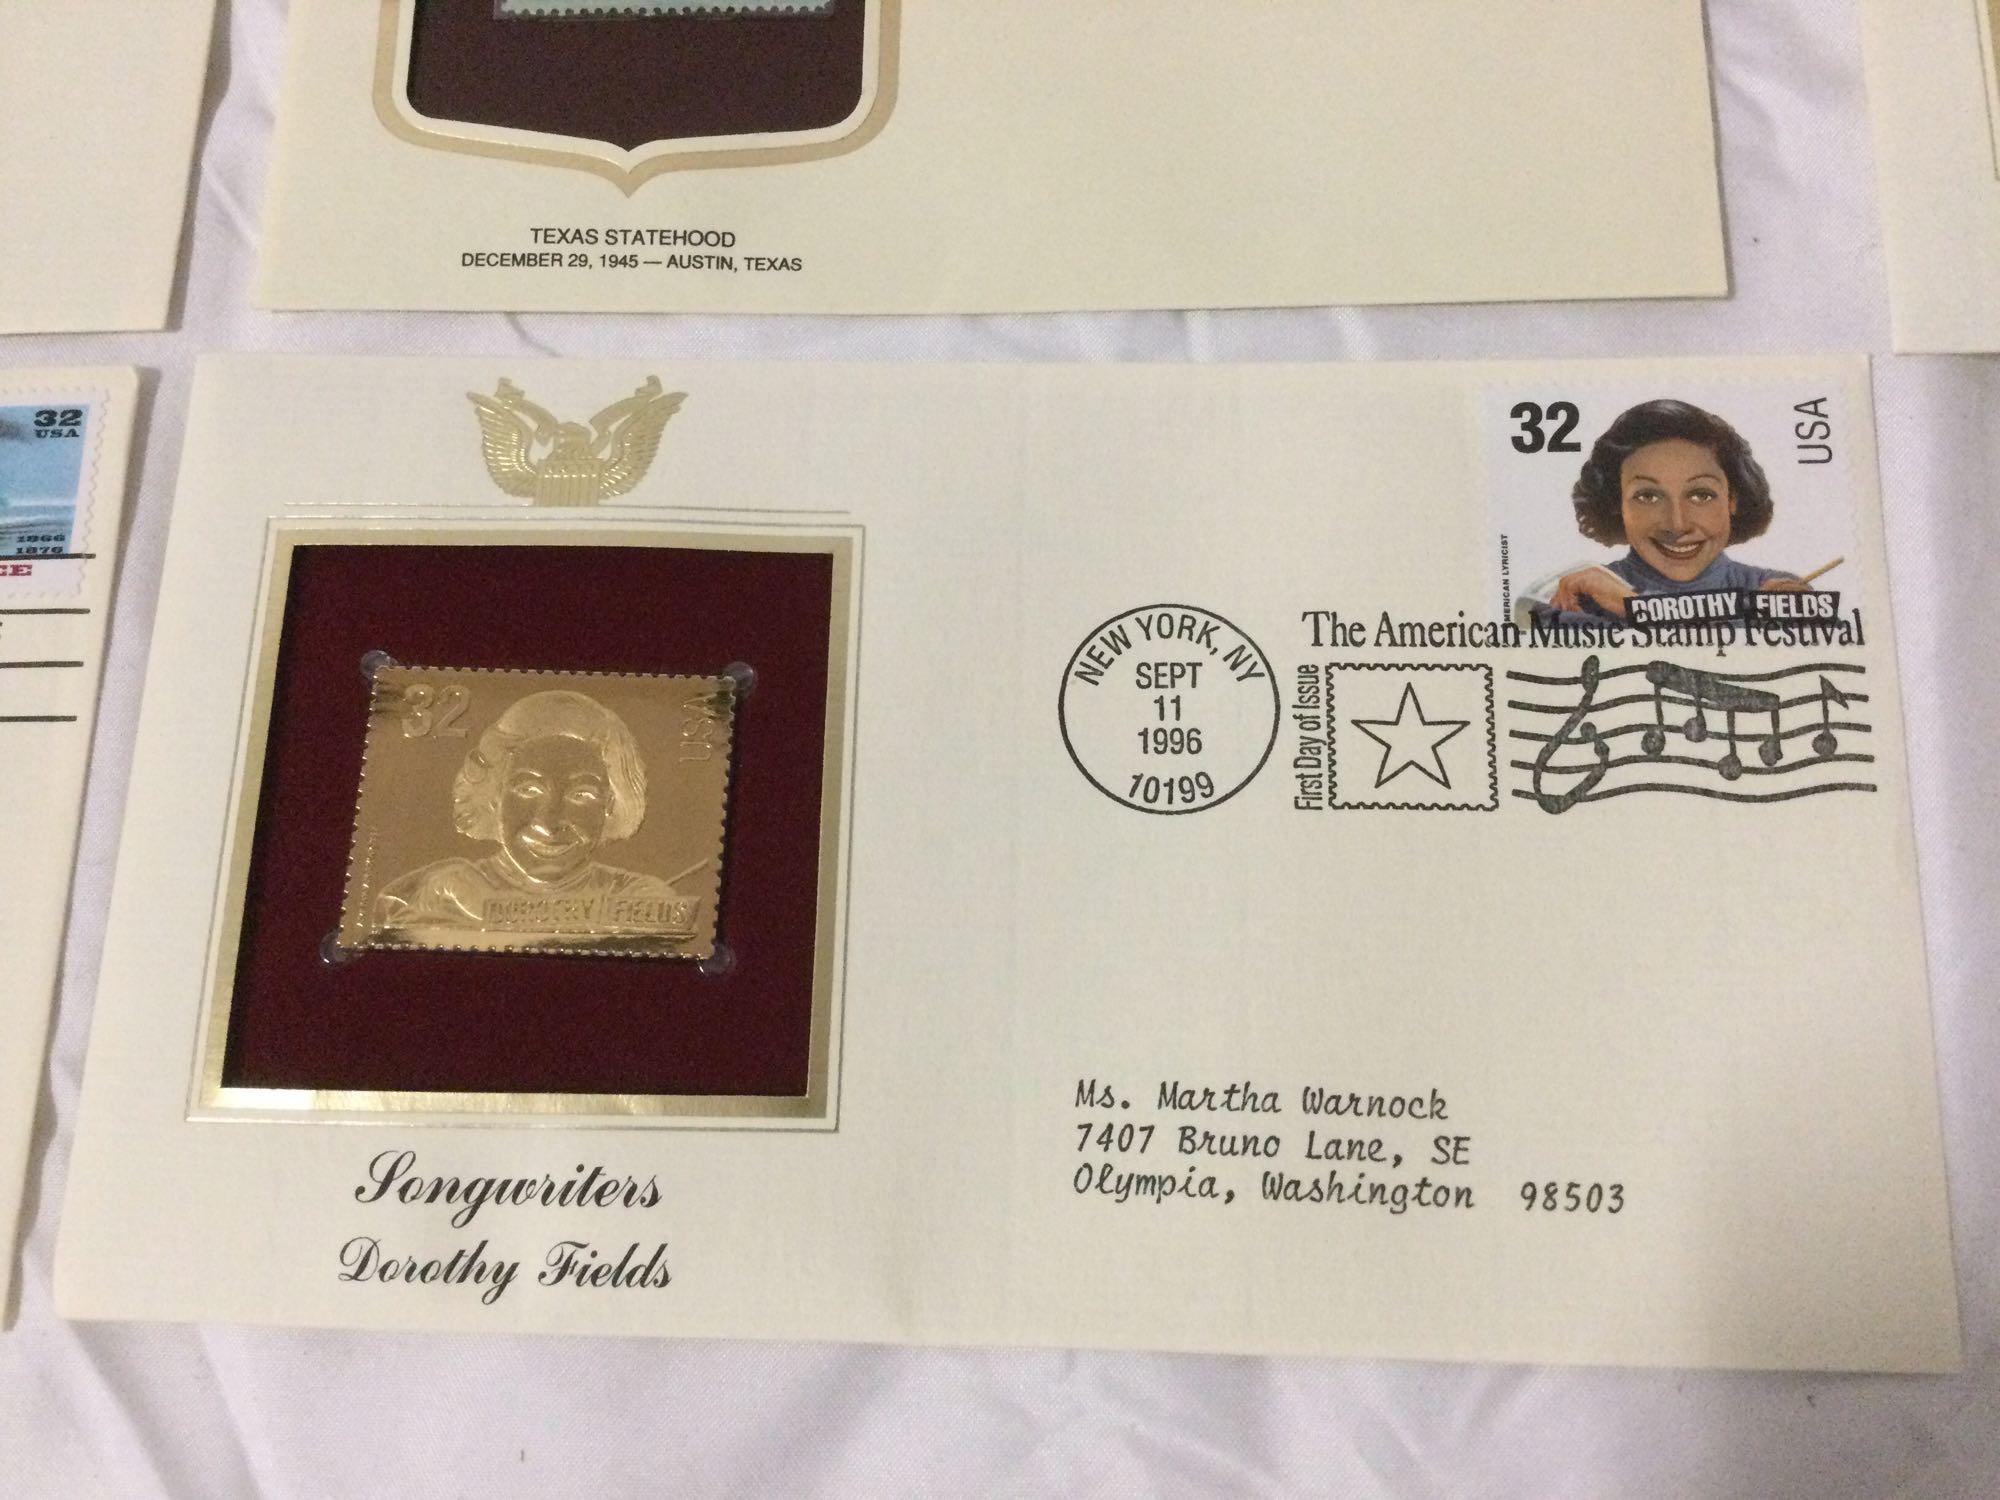 10 pc. lot of 1996 USA First Day of Issue / gold foil replica stamps w/ envelopes.